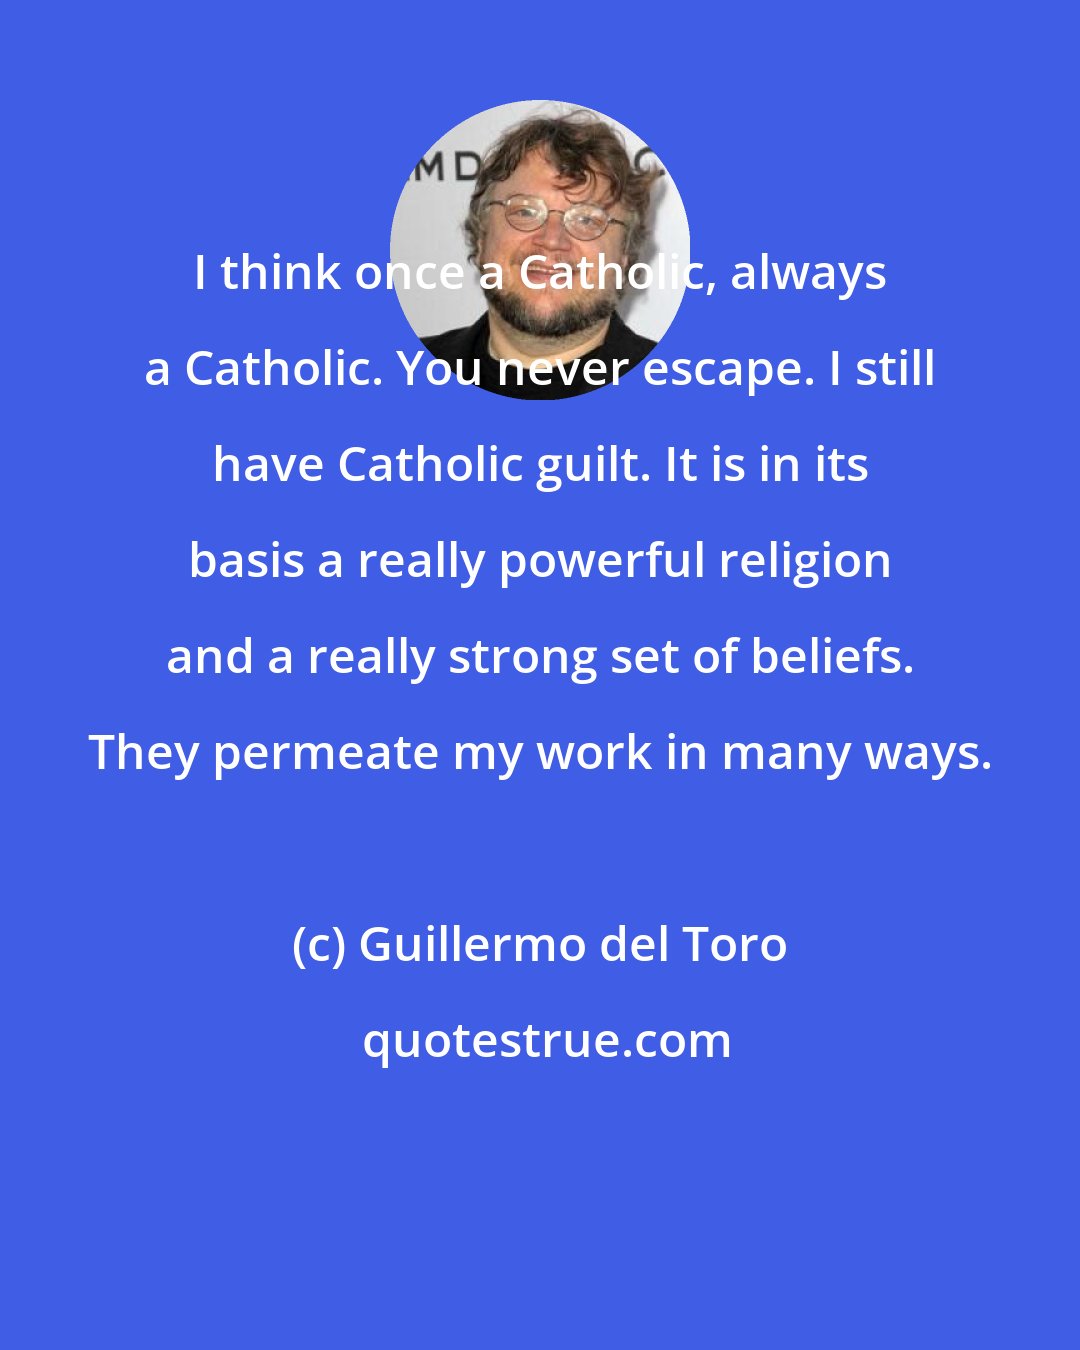 Guillermo del Toro: I think once a Catholic, always a Catholic. You never escape. I still have Catholic guilt. It is in its basis a really powerful religion and a really strong set of beliefs. They permeate my work in many ways.